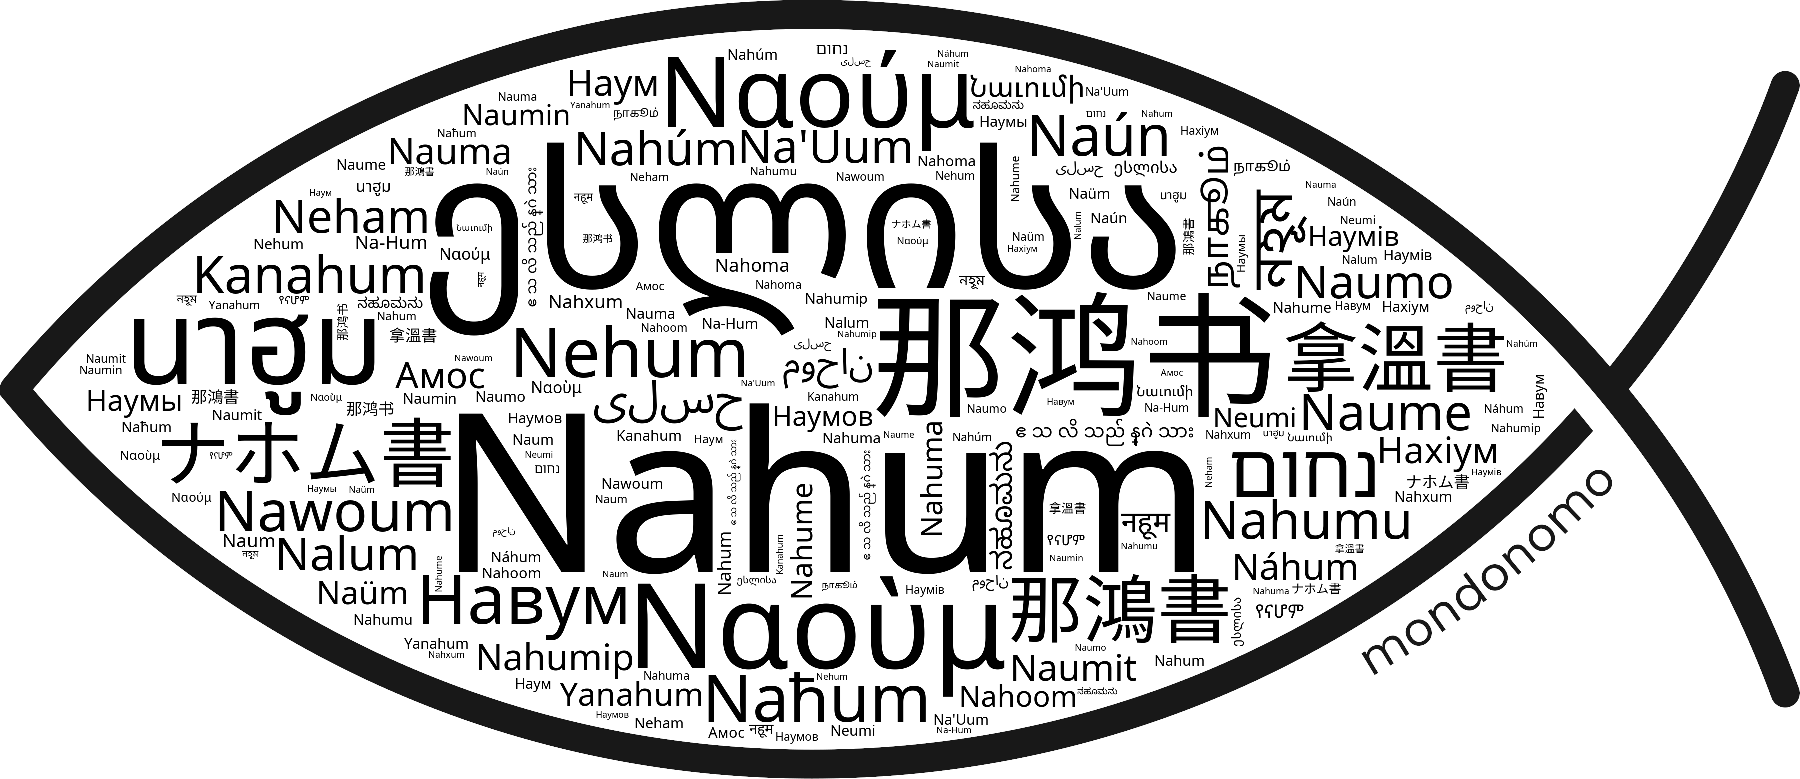 Name Nahum in the world's Bibles